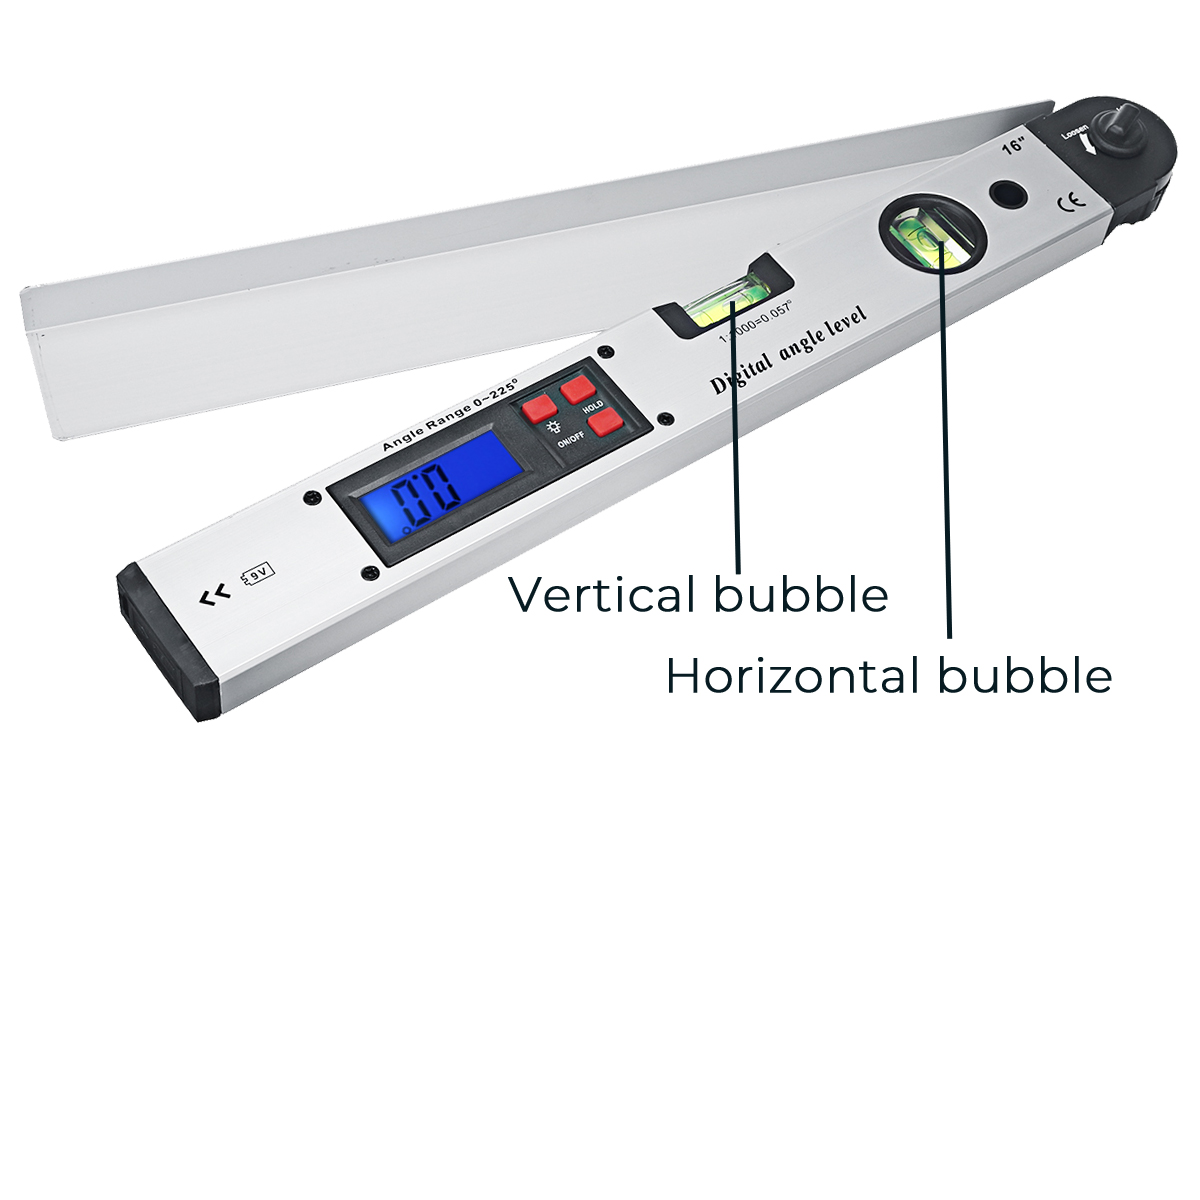 250400mm-Digital-Angle-Level-Meter-LCD-Display-0-225-Degree-for-Measuring-Roof-Angles-Fitting-Up-Win-1740234-3